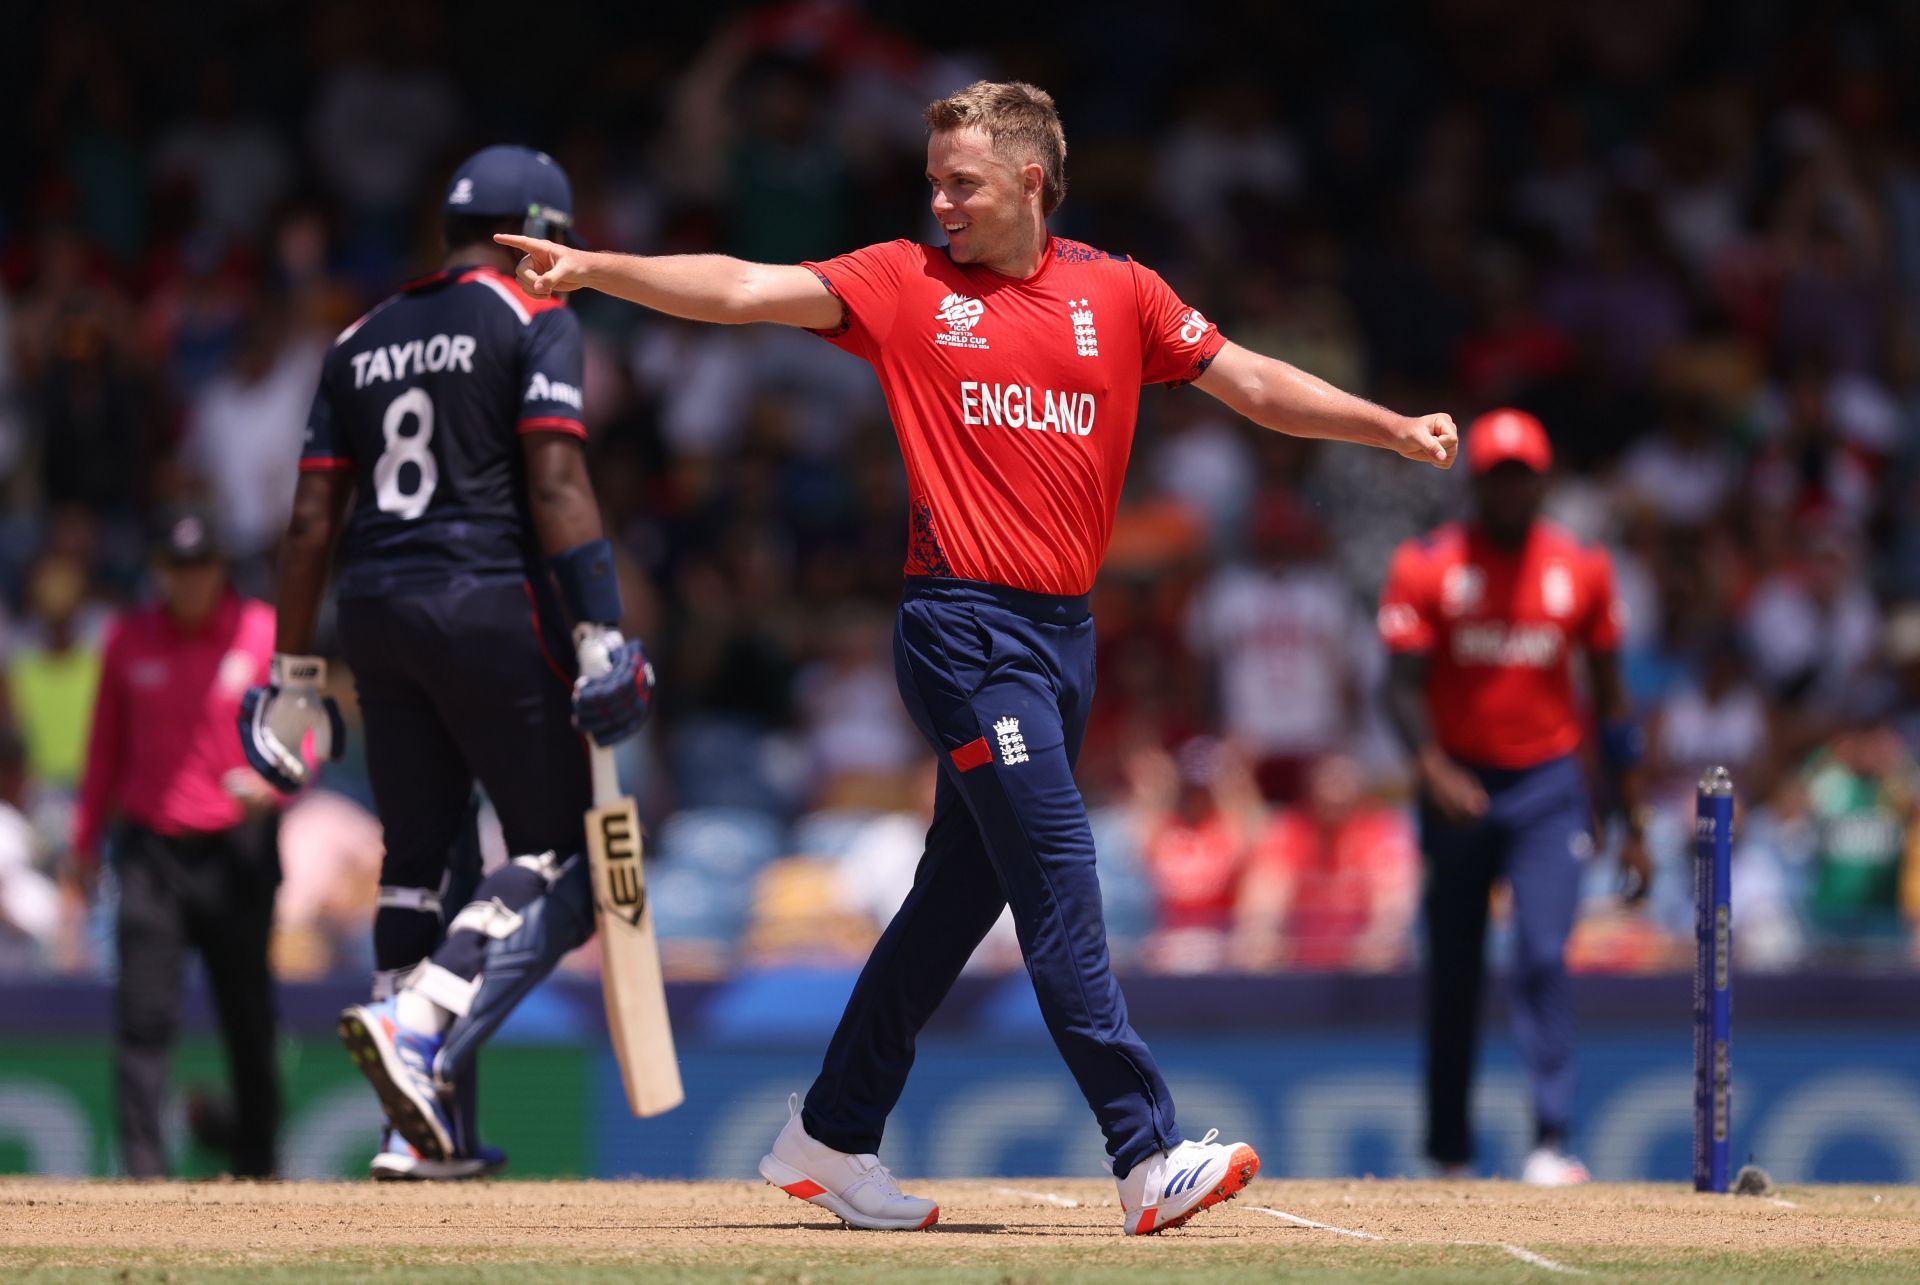 Sam Curran has picked up two wickets in 10 overs in the ongoing T20 World Cup.